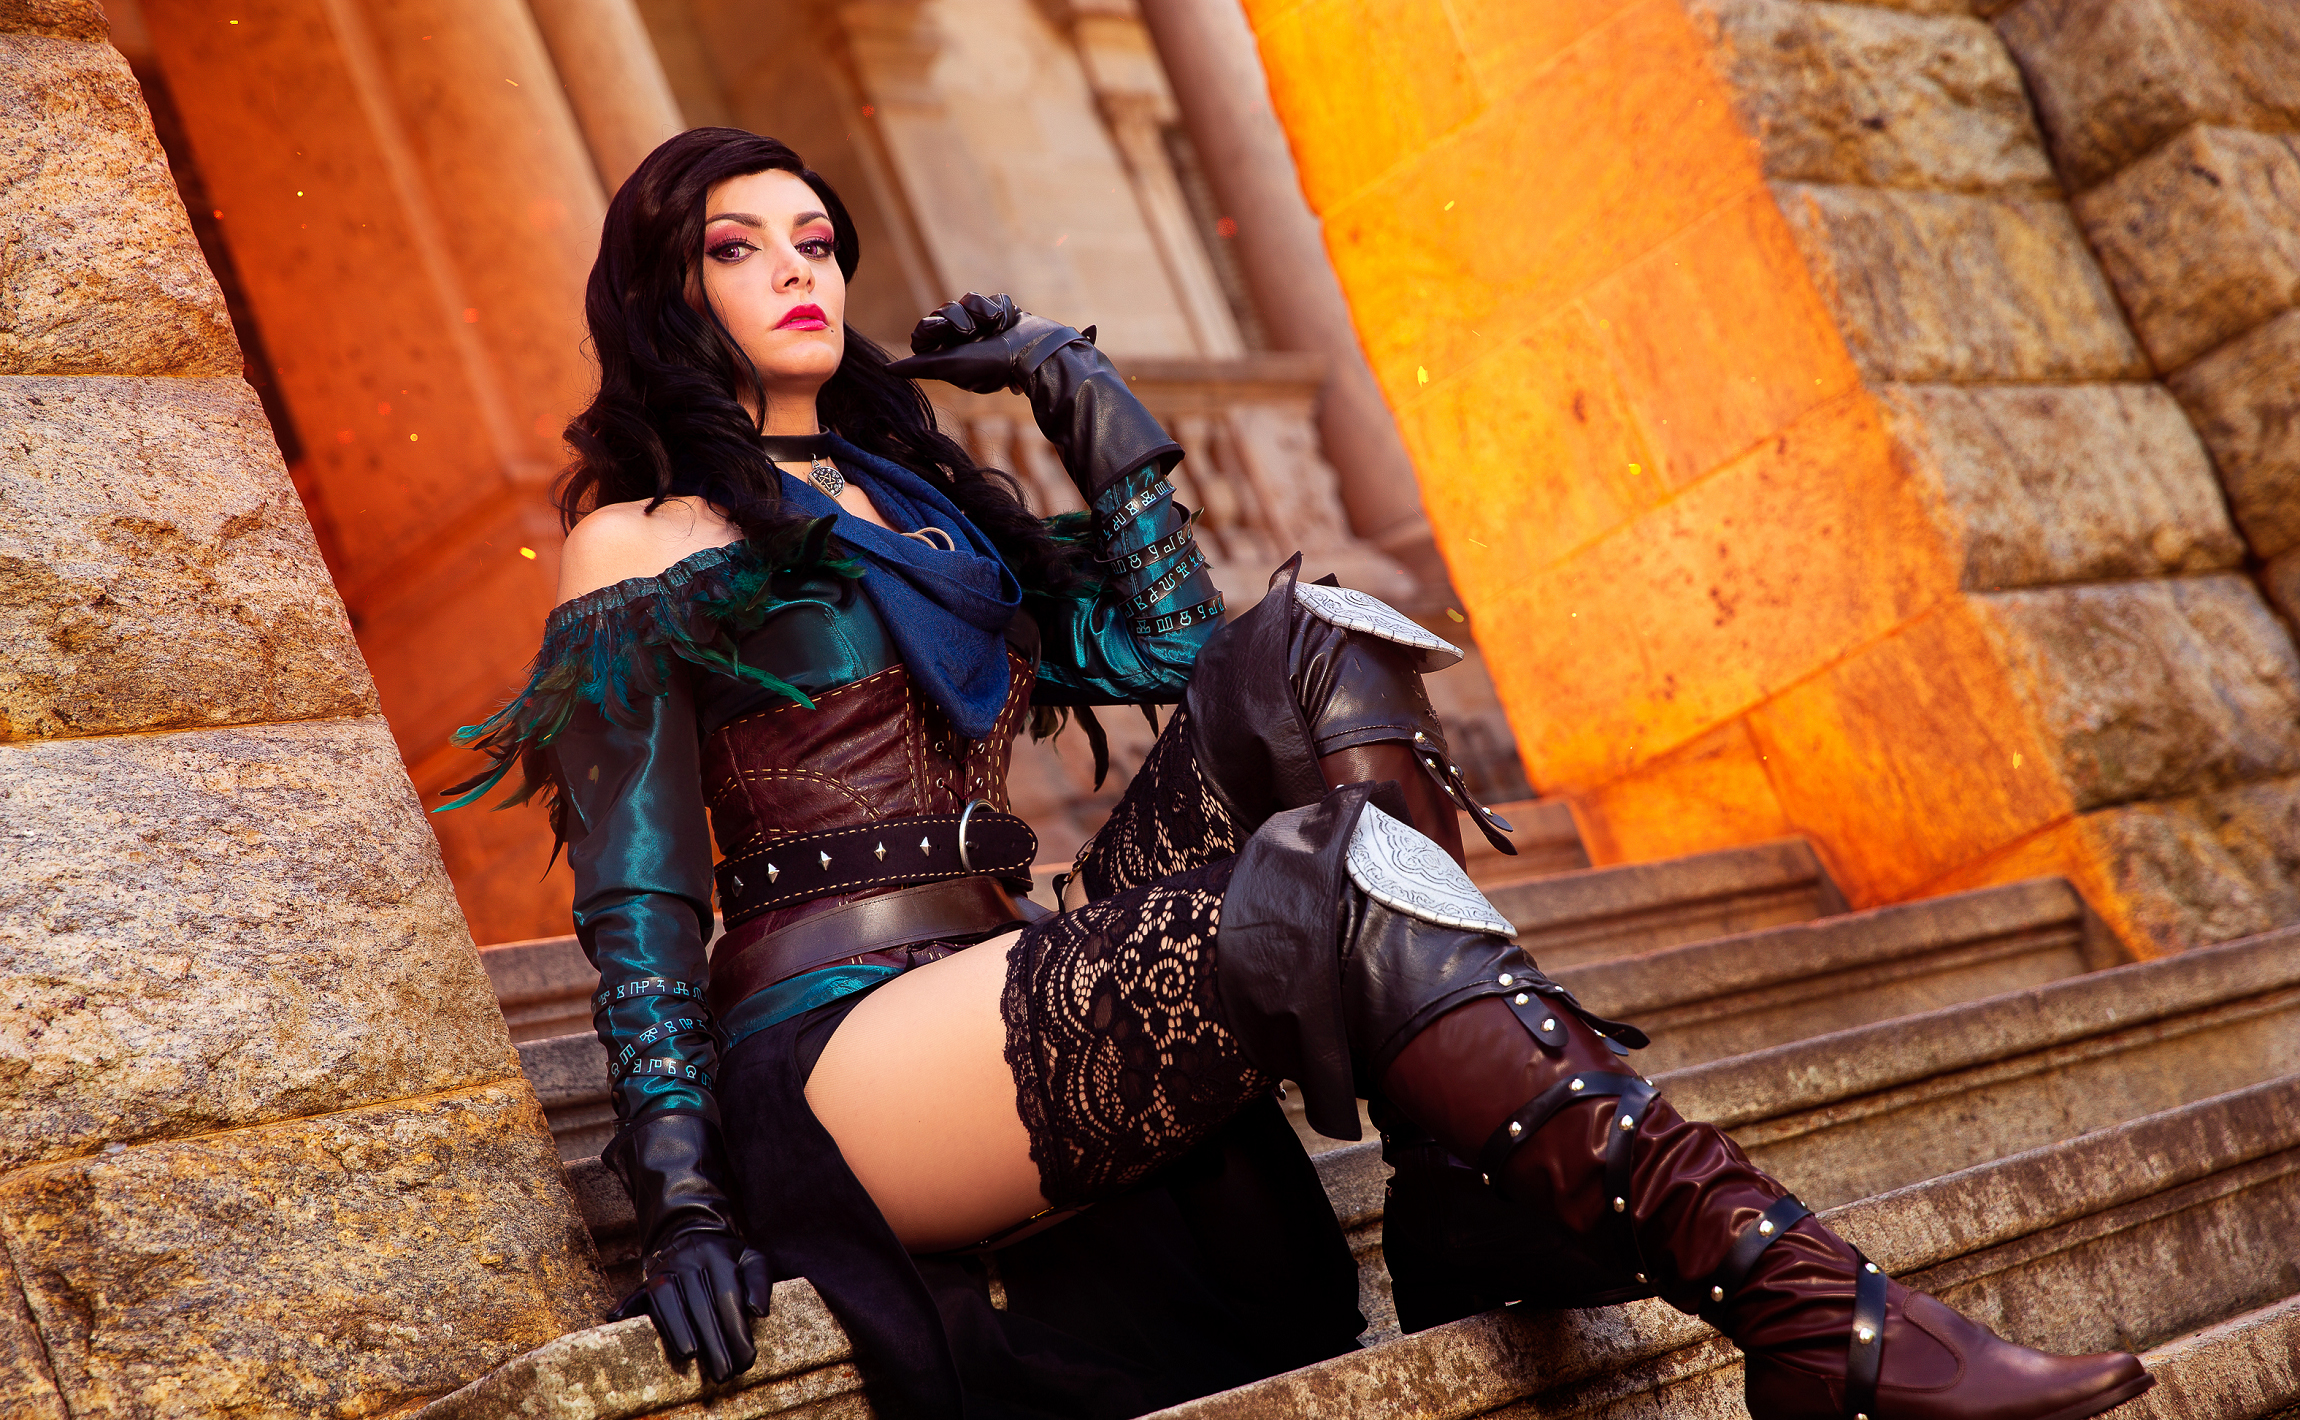 women, cosplay, boots, collar, glove, the witcher, thigh highs, yennefer of vengerberg images